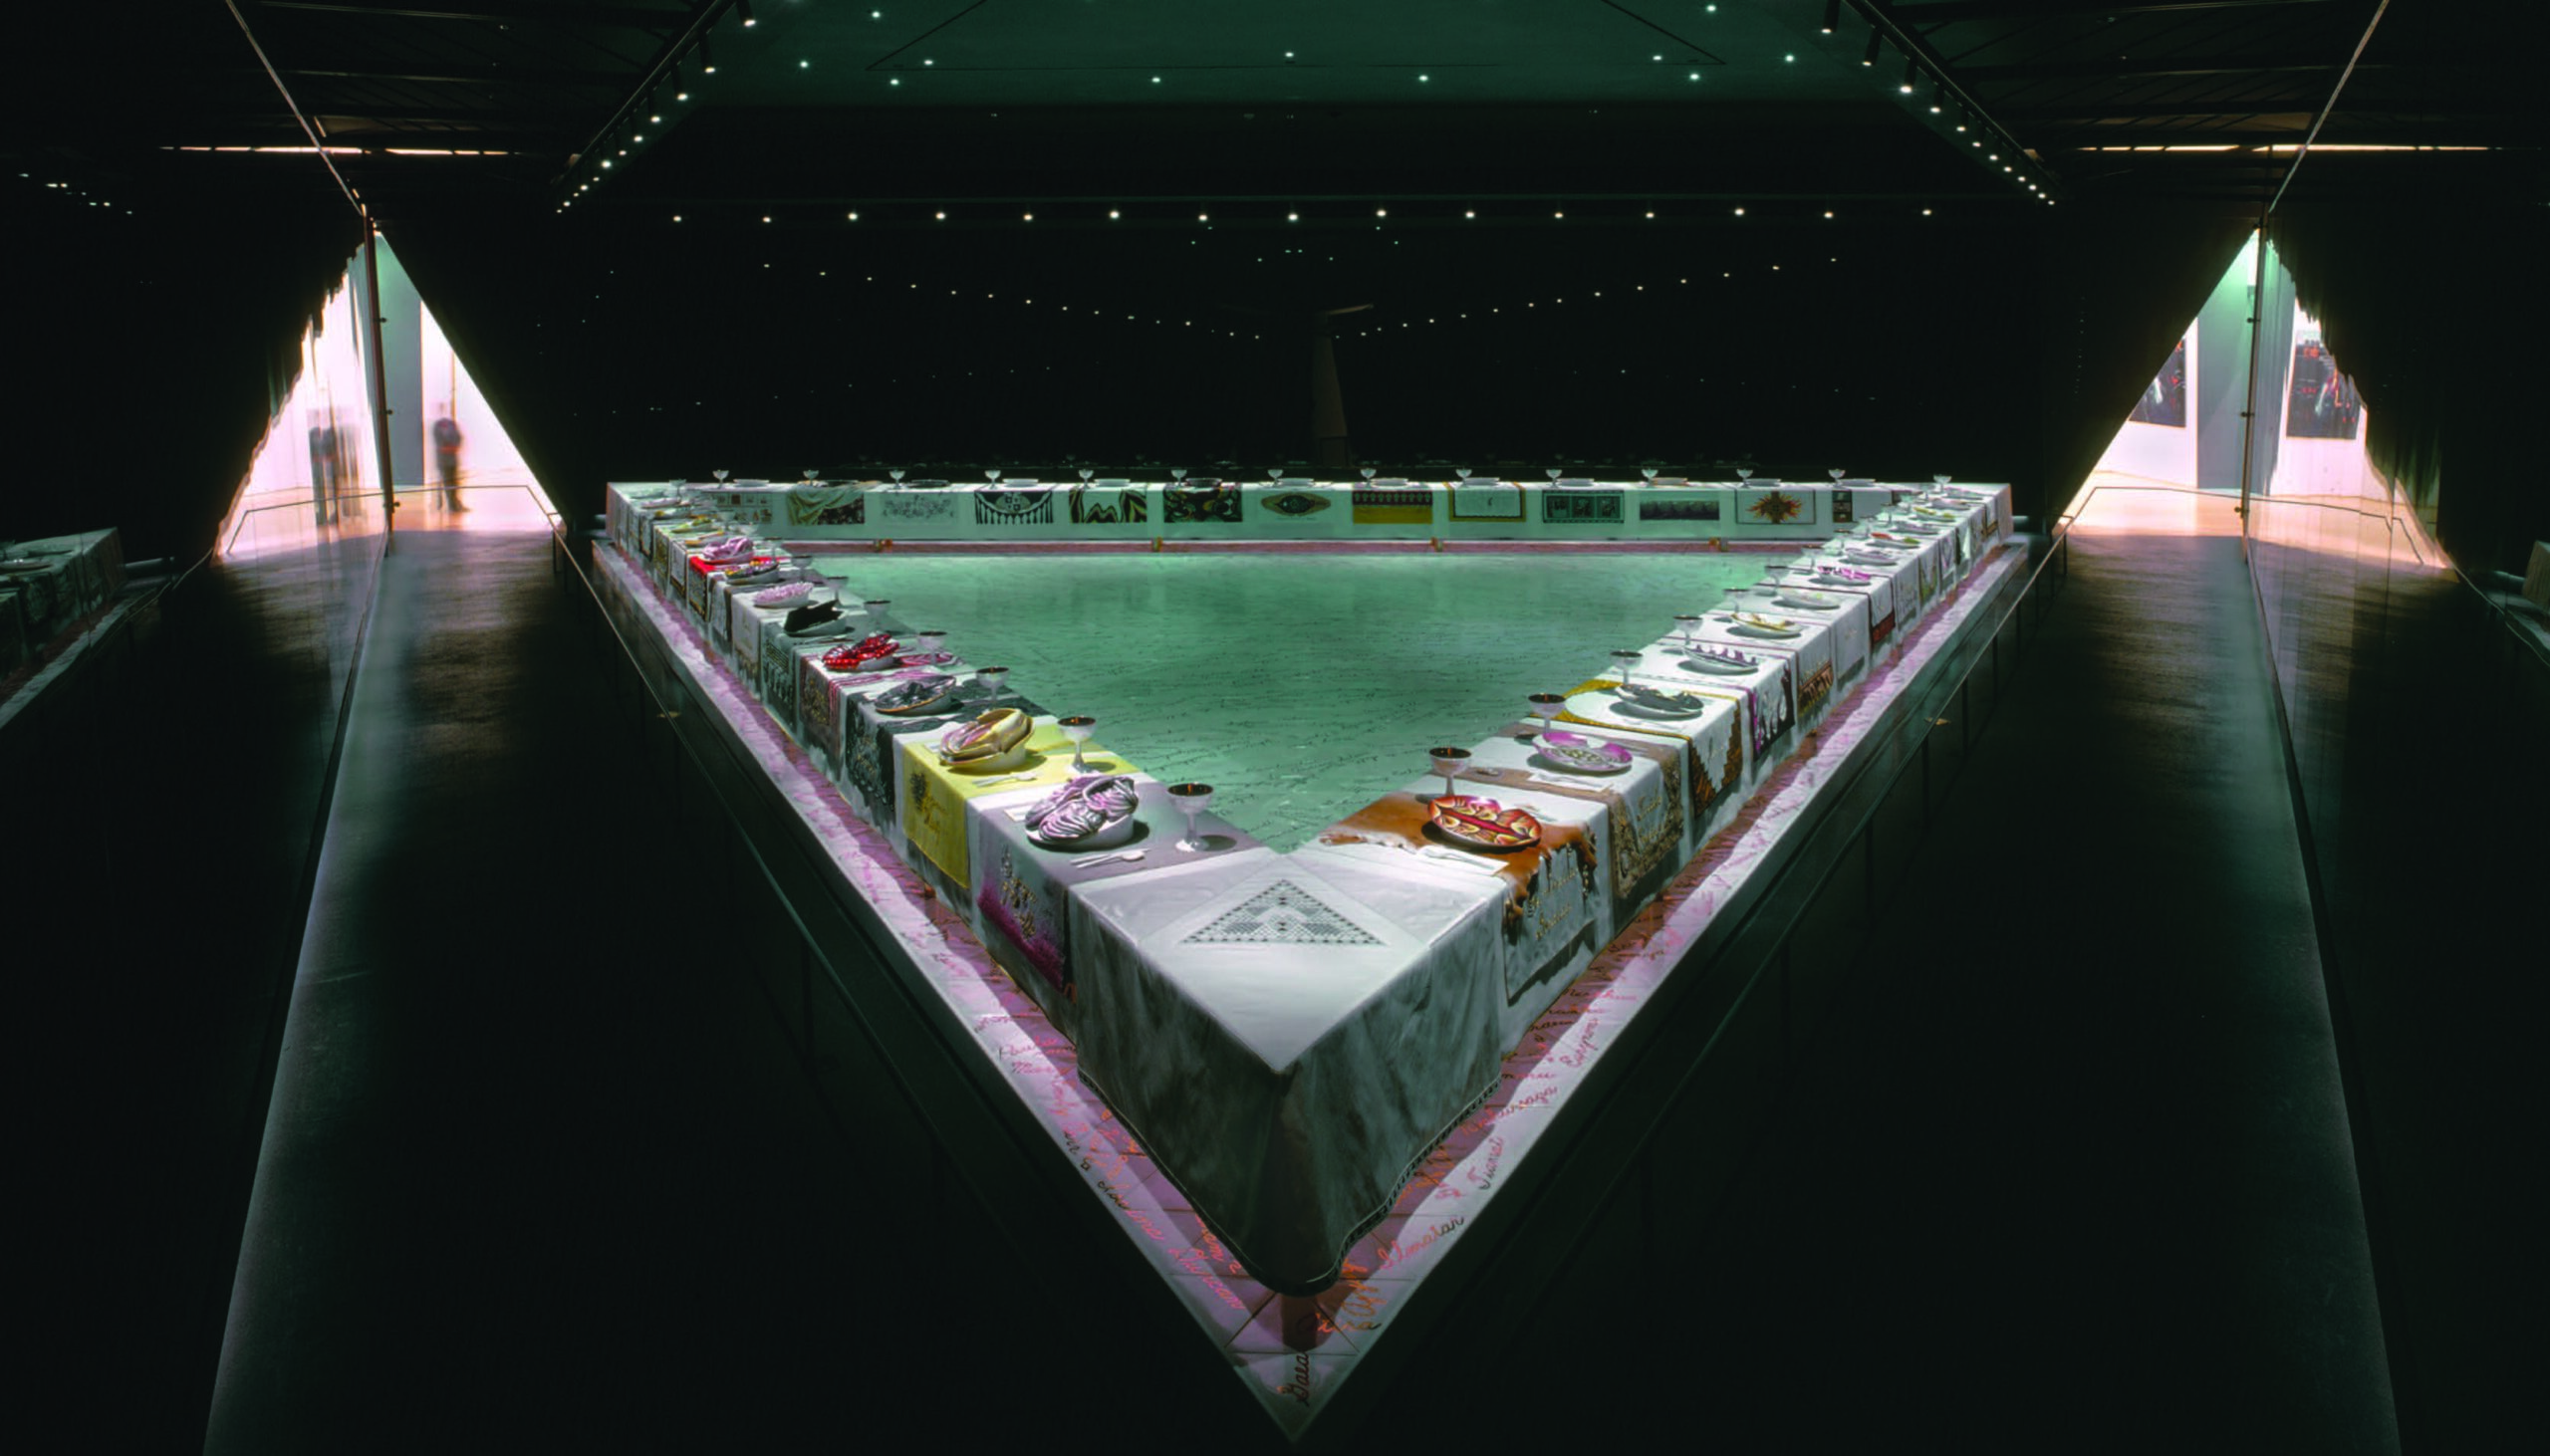 Judy Chicago, The Dinner Party, 1979. Mixed media, 48 × 48 × 3 ft. Collection of the Brooklyn Museum, Brooklyn, New York. © Judy Chicago. Photograph © Donald Woodman.